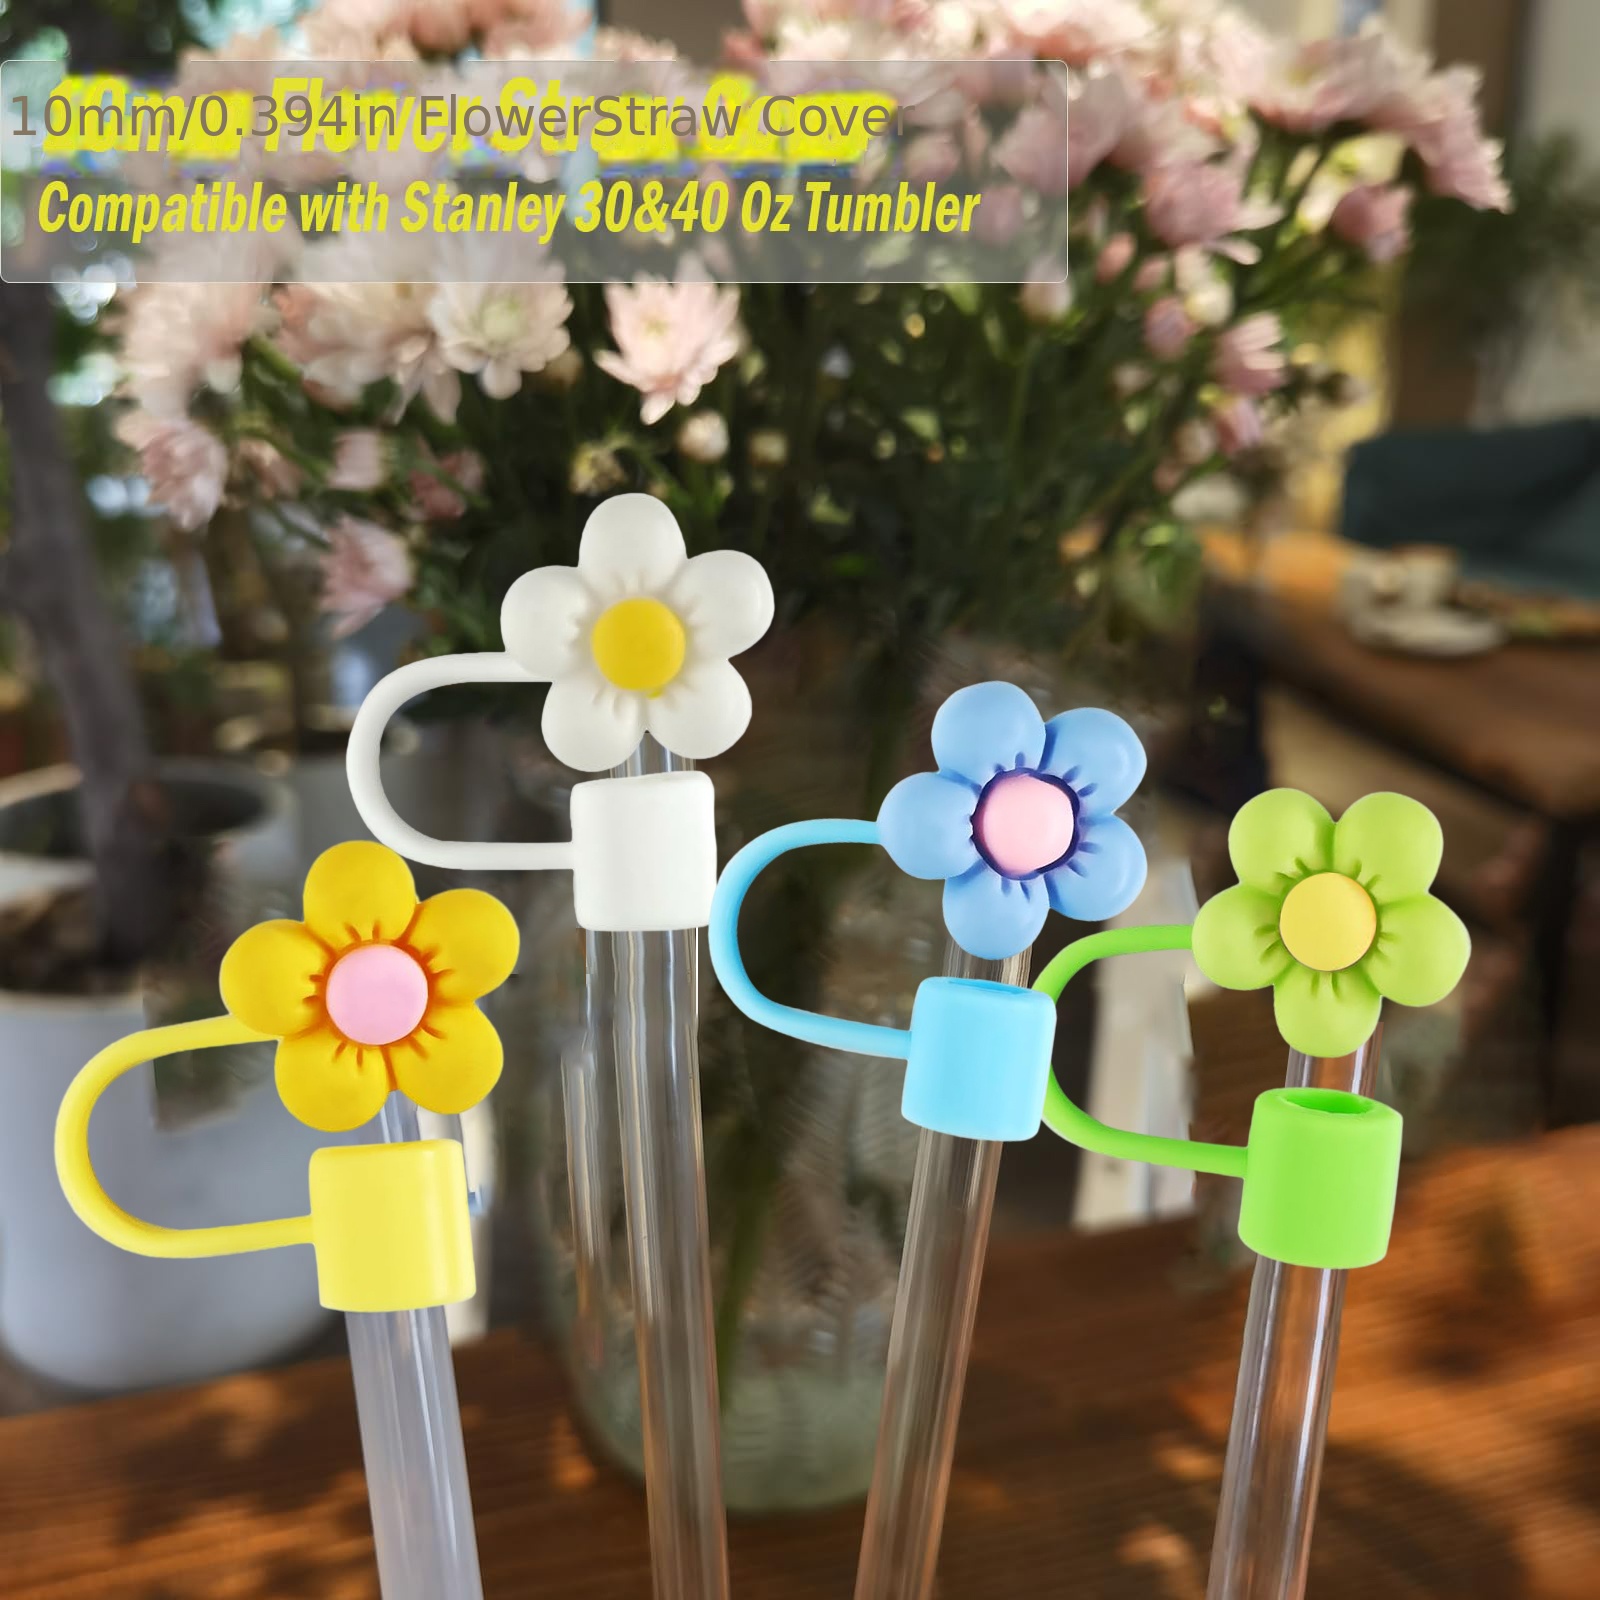 Flower Straw Cover Cap for Stanley Cup Silicone Straw Topper Compatible  with 30&40 Oz Tumbler with Handle,Straw Tip Covers 10mm 0.4in for Straw Tip